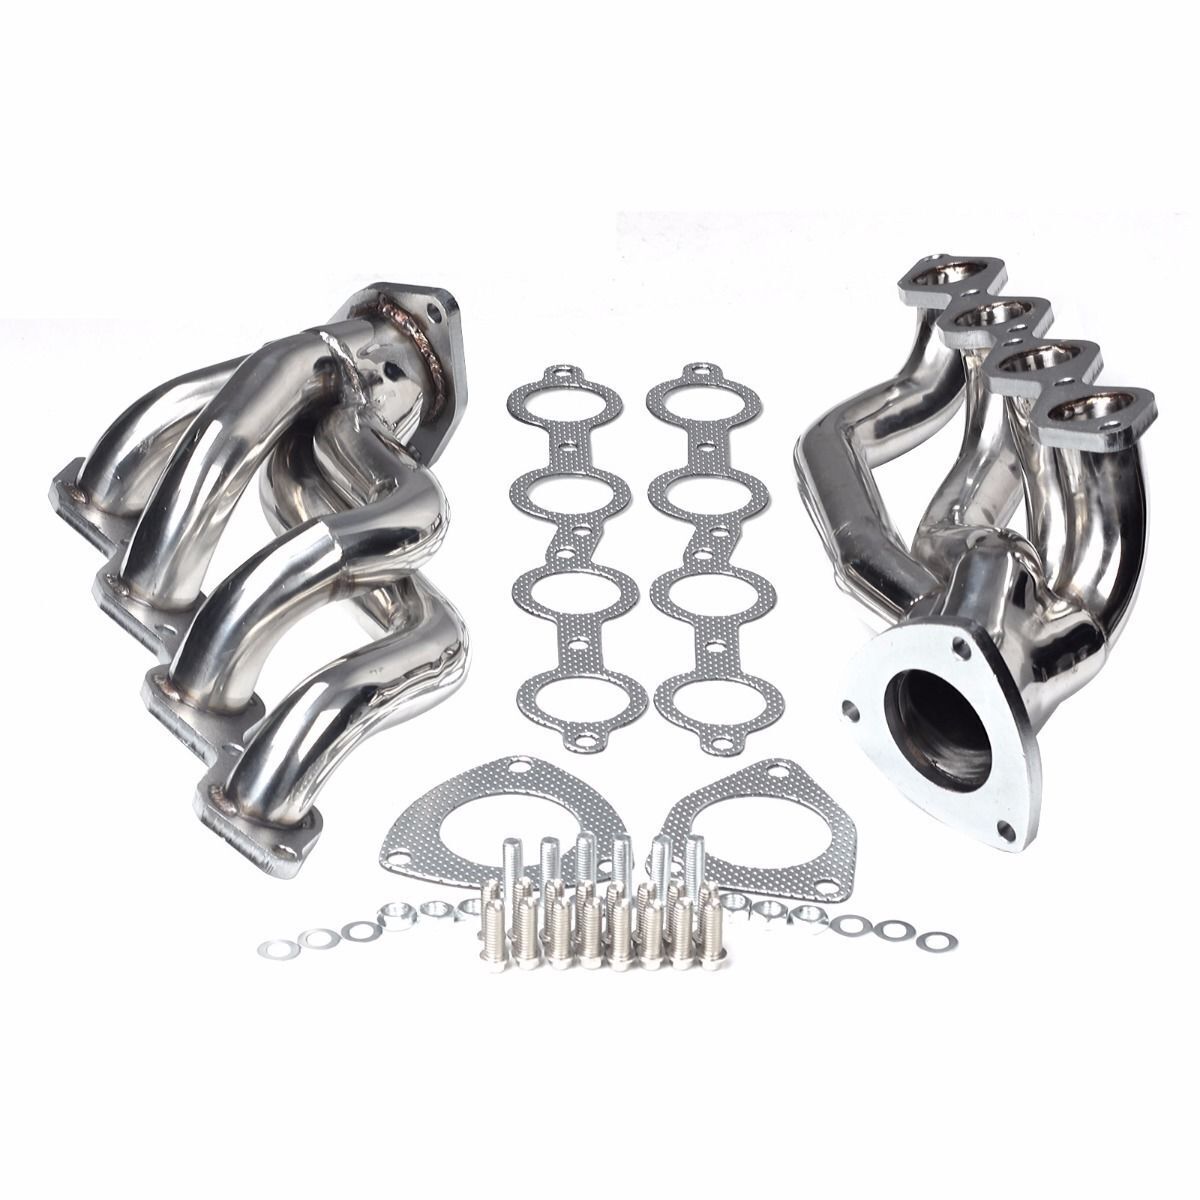 Stainless Exhaust Header For 00-06 Chevy GMC Avalanche Silverado 4.8L 5.3L V8 US